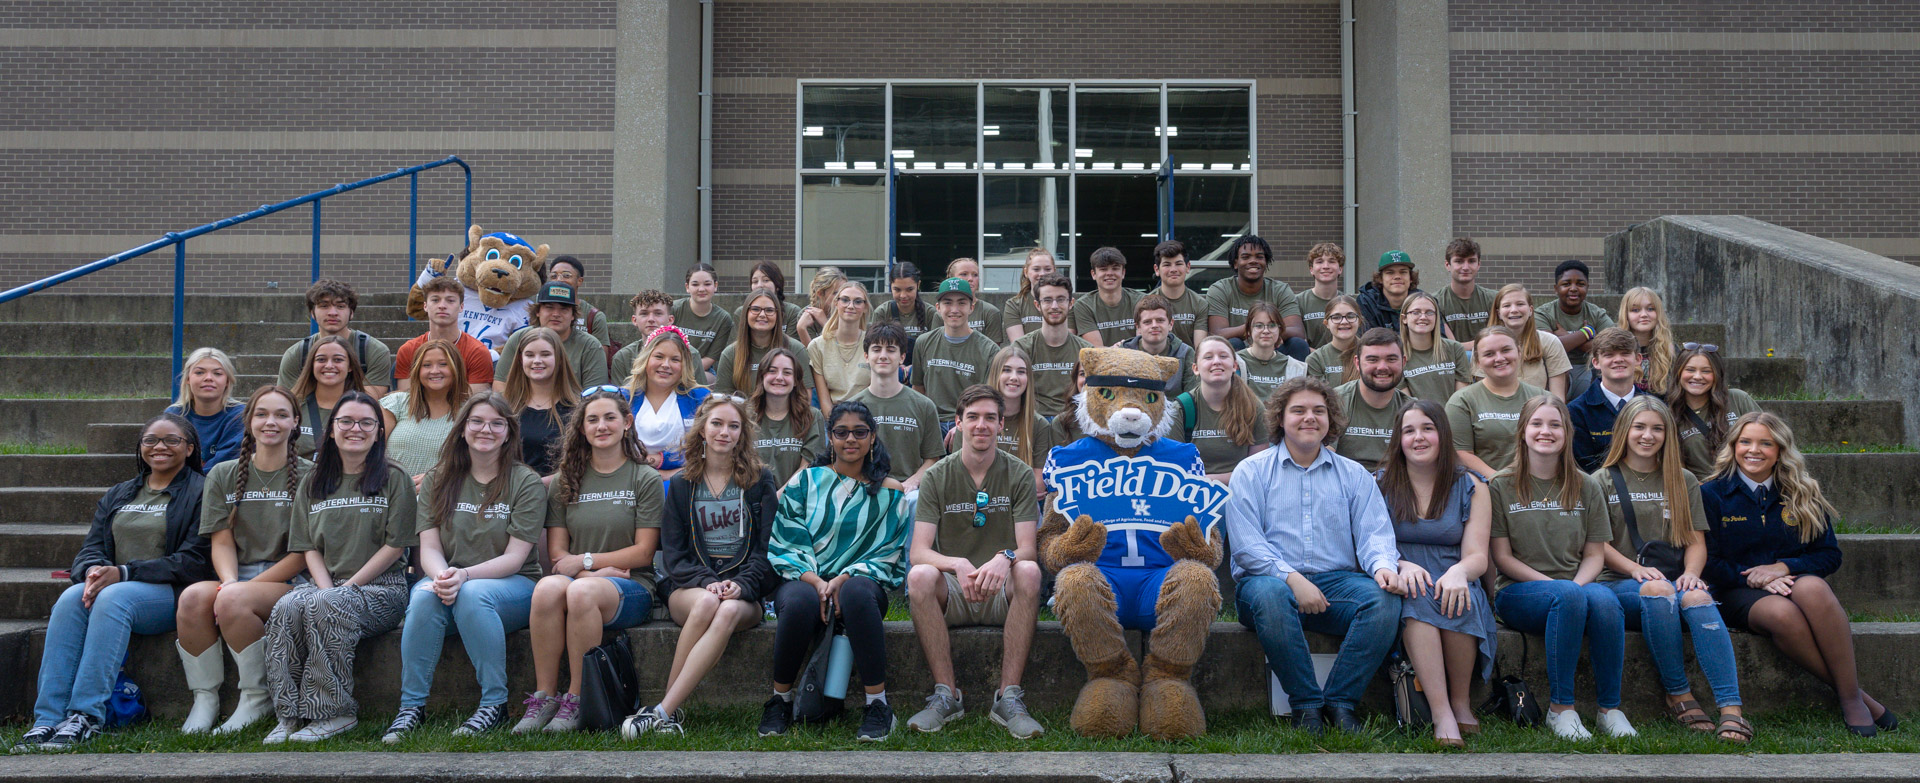 UK Field Day participants group shot including wildcat and scratch